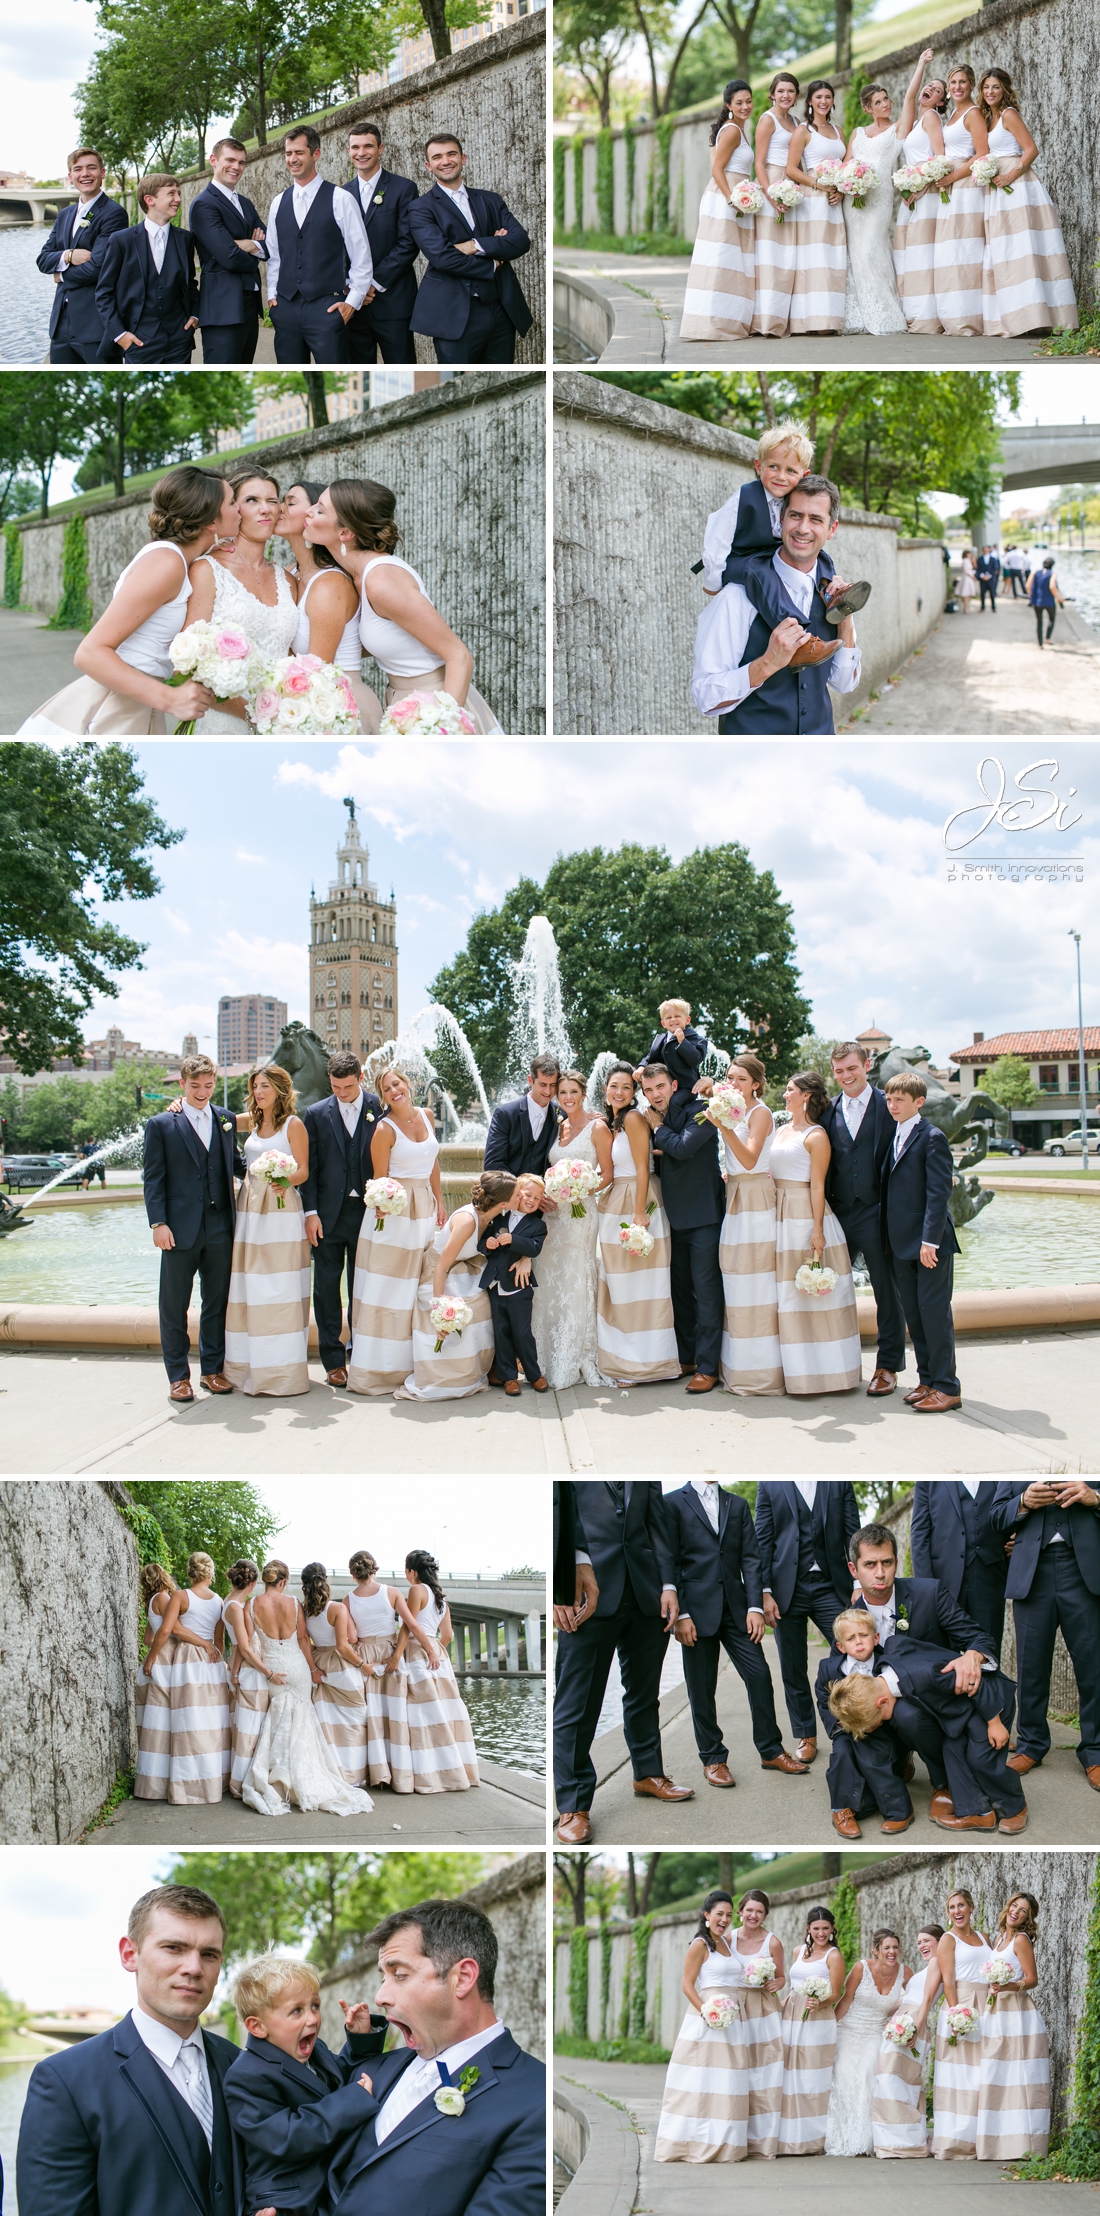 Kansas City The Urban Event vibrant candid fun bridal party wedding picture